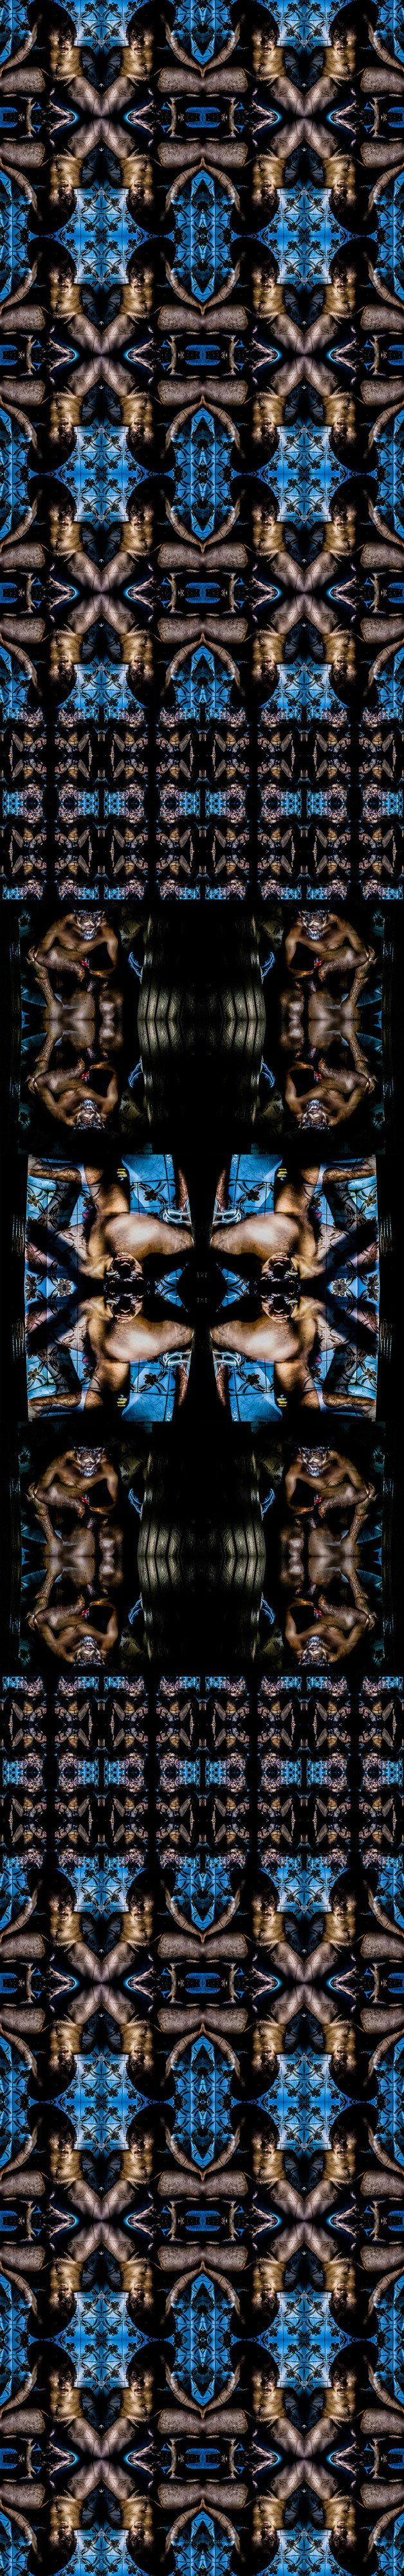 Photo by nuartistcoexprimntal with the username @nuartistcoexprimntal,  January 23, 2021 at 12:33 AM. The post is about the topic Erotic Horror and the text says 'colagem com autorretrato em pintura de luz ( light painting self portrait collage)'